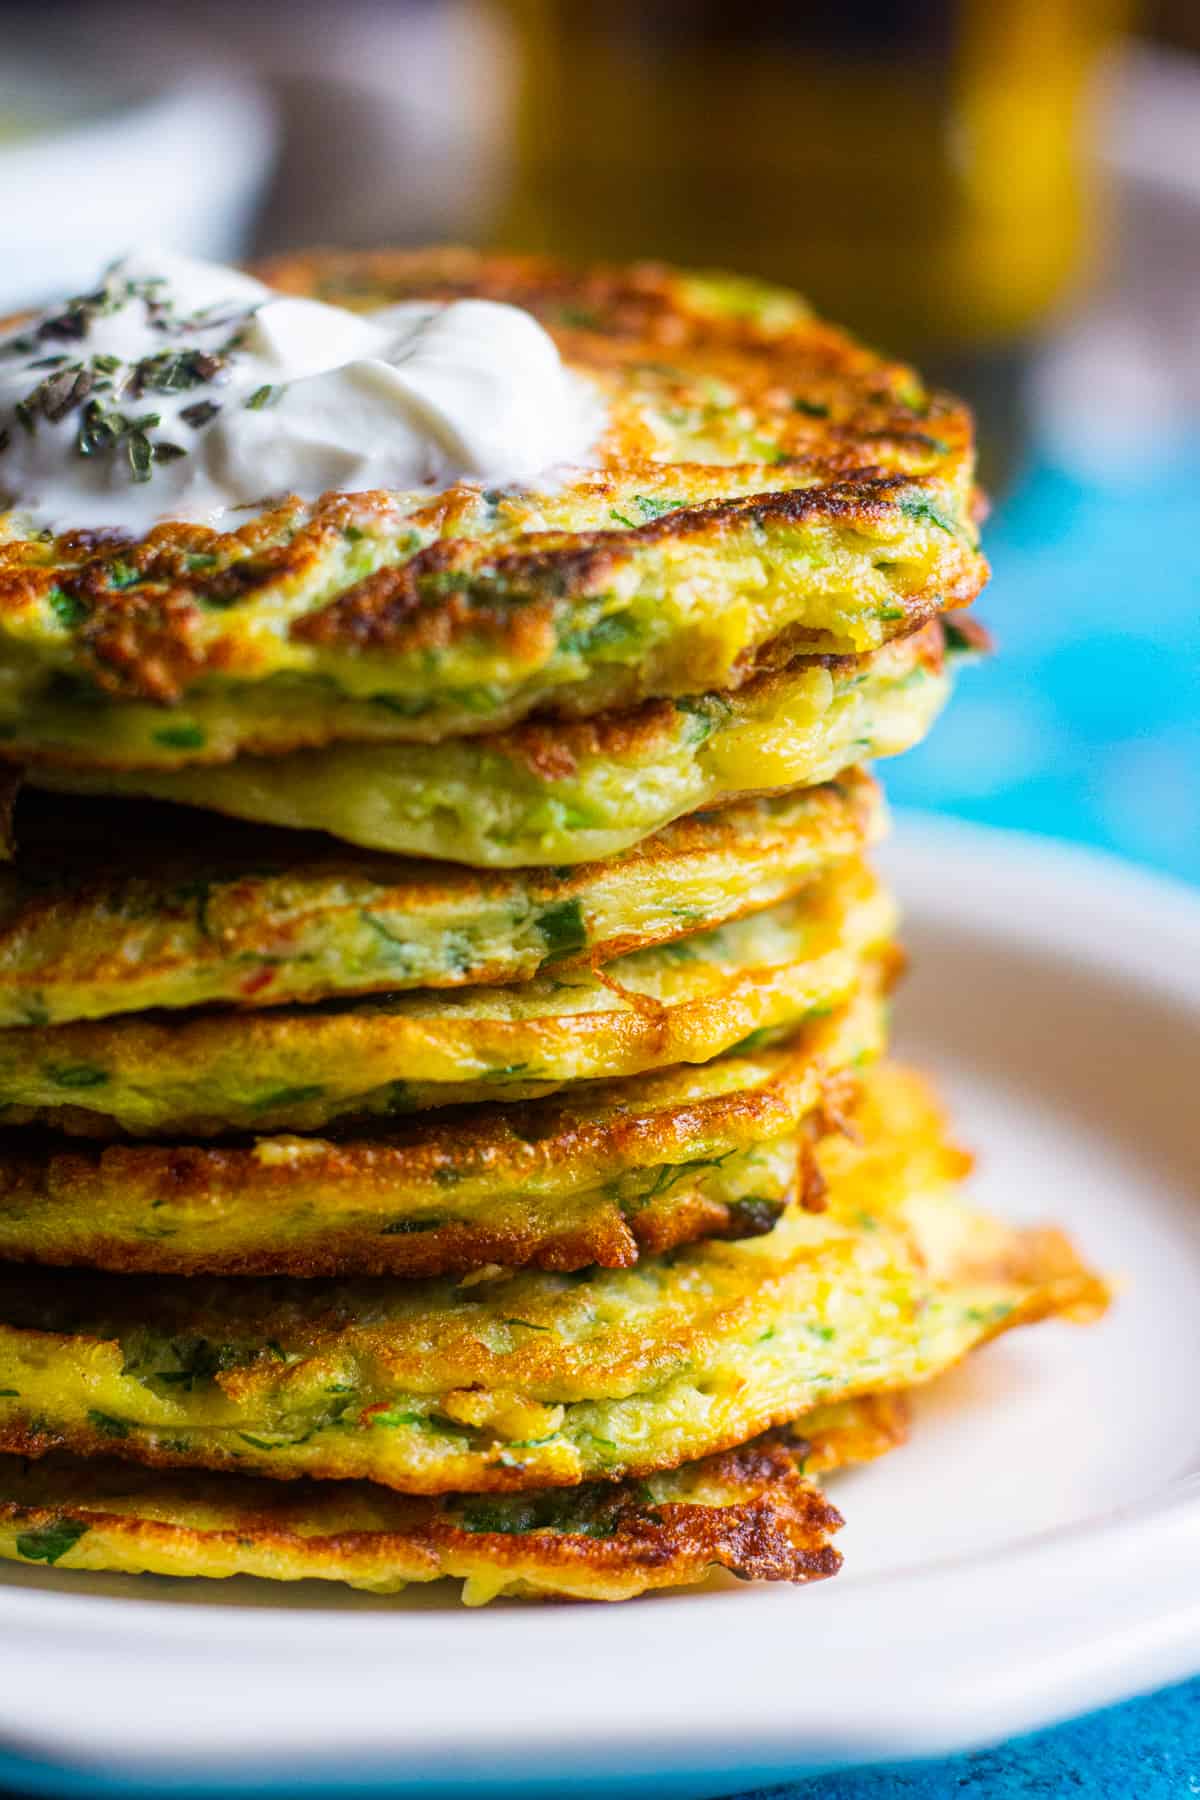 Mucver or zucchini fritters is a classic Turkish dish that's ready in 30 minutes. This recipe calls for fresh zucchini and herbs and it's very simple to make. 
